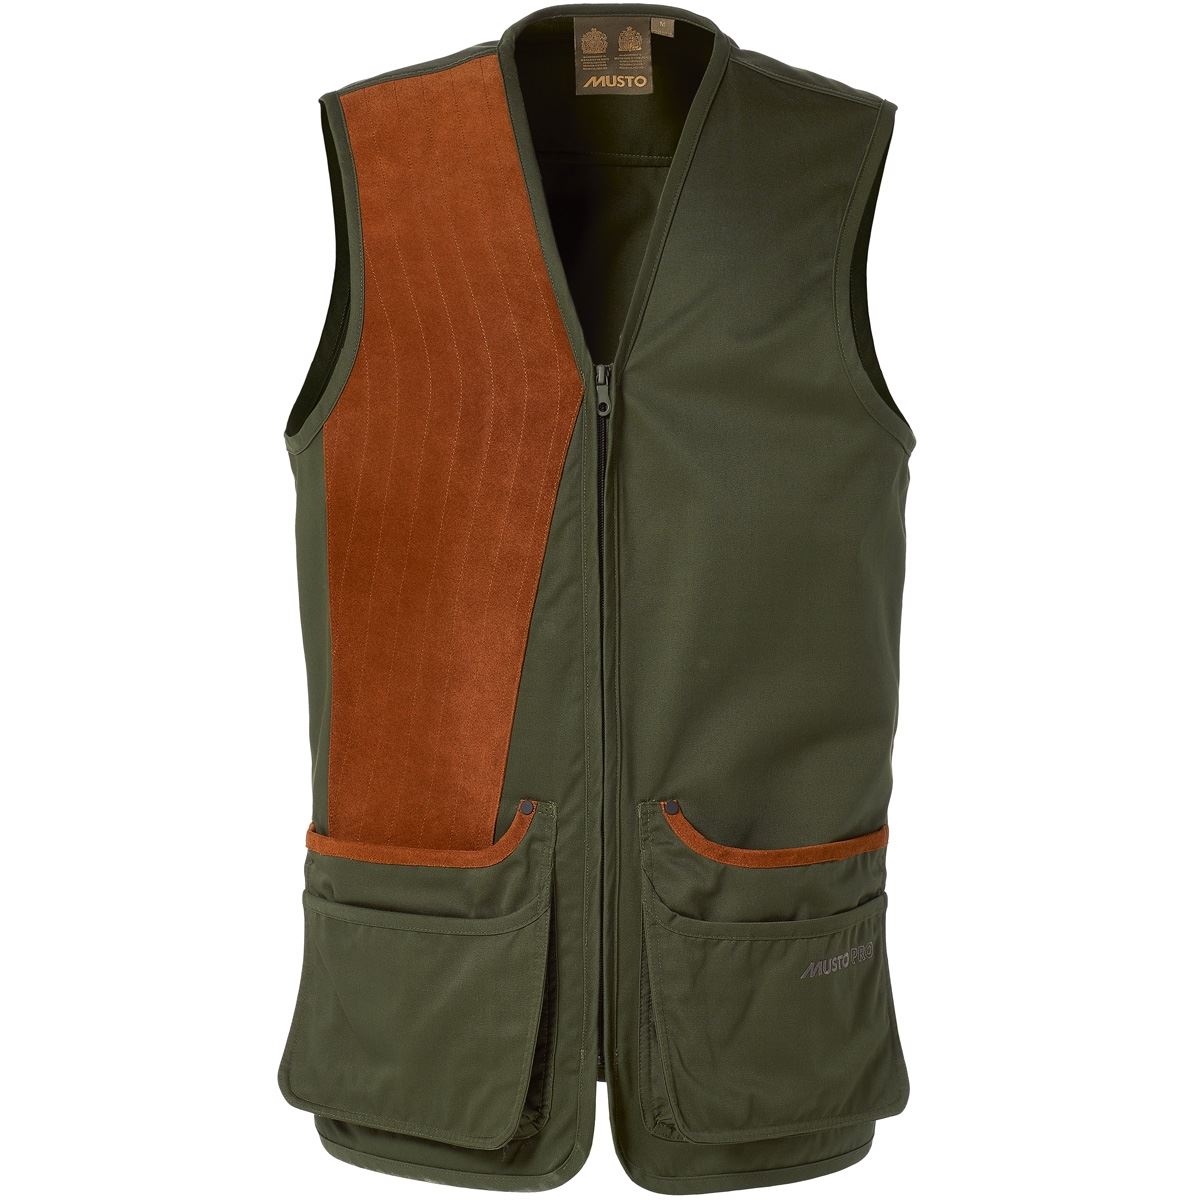 What are the key attributes of the Musto shooting vest?